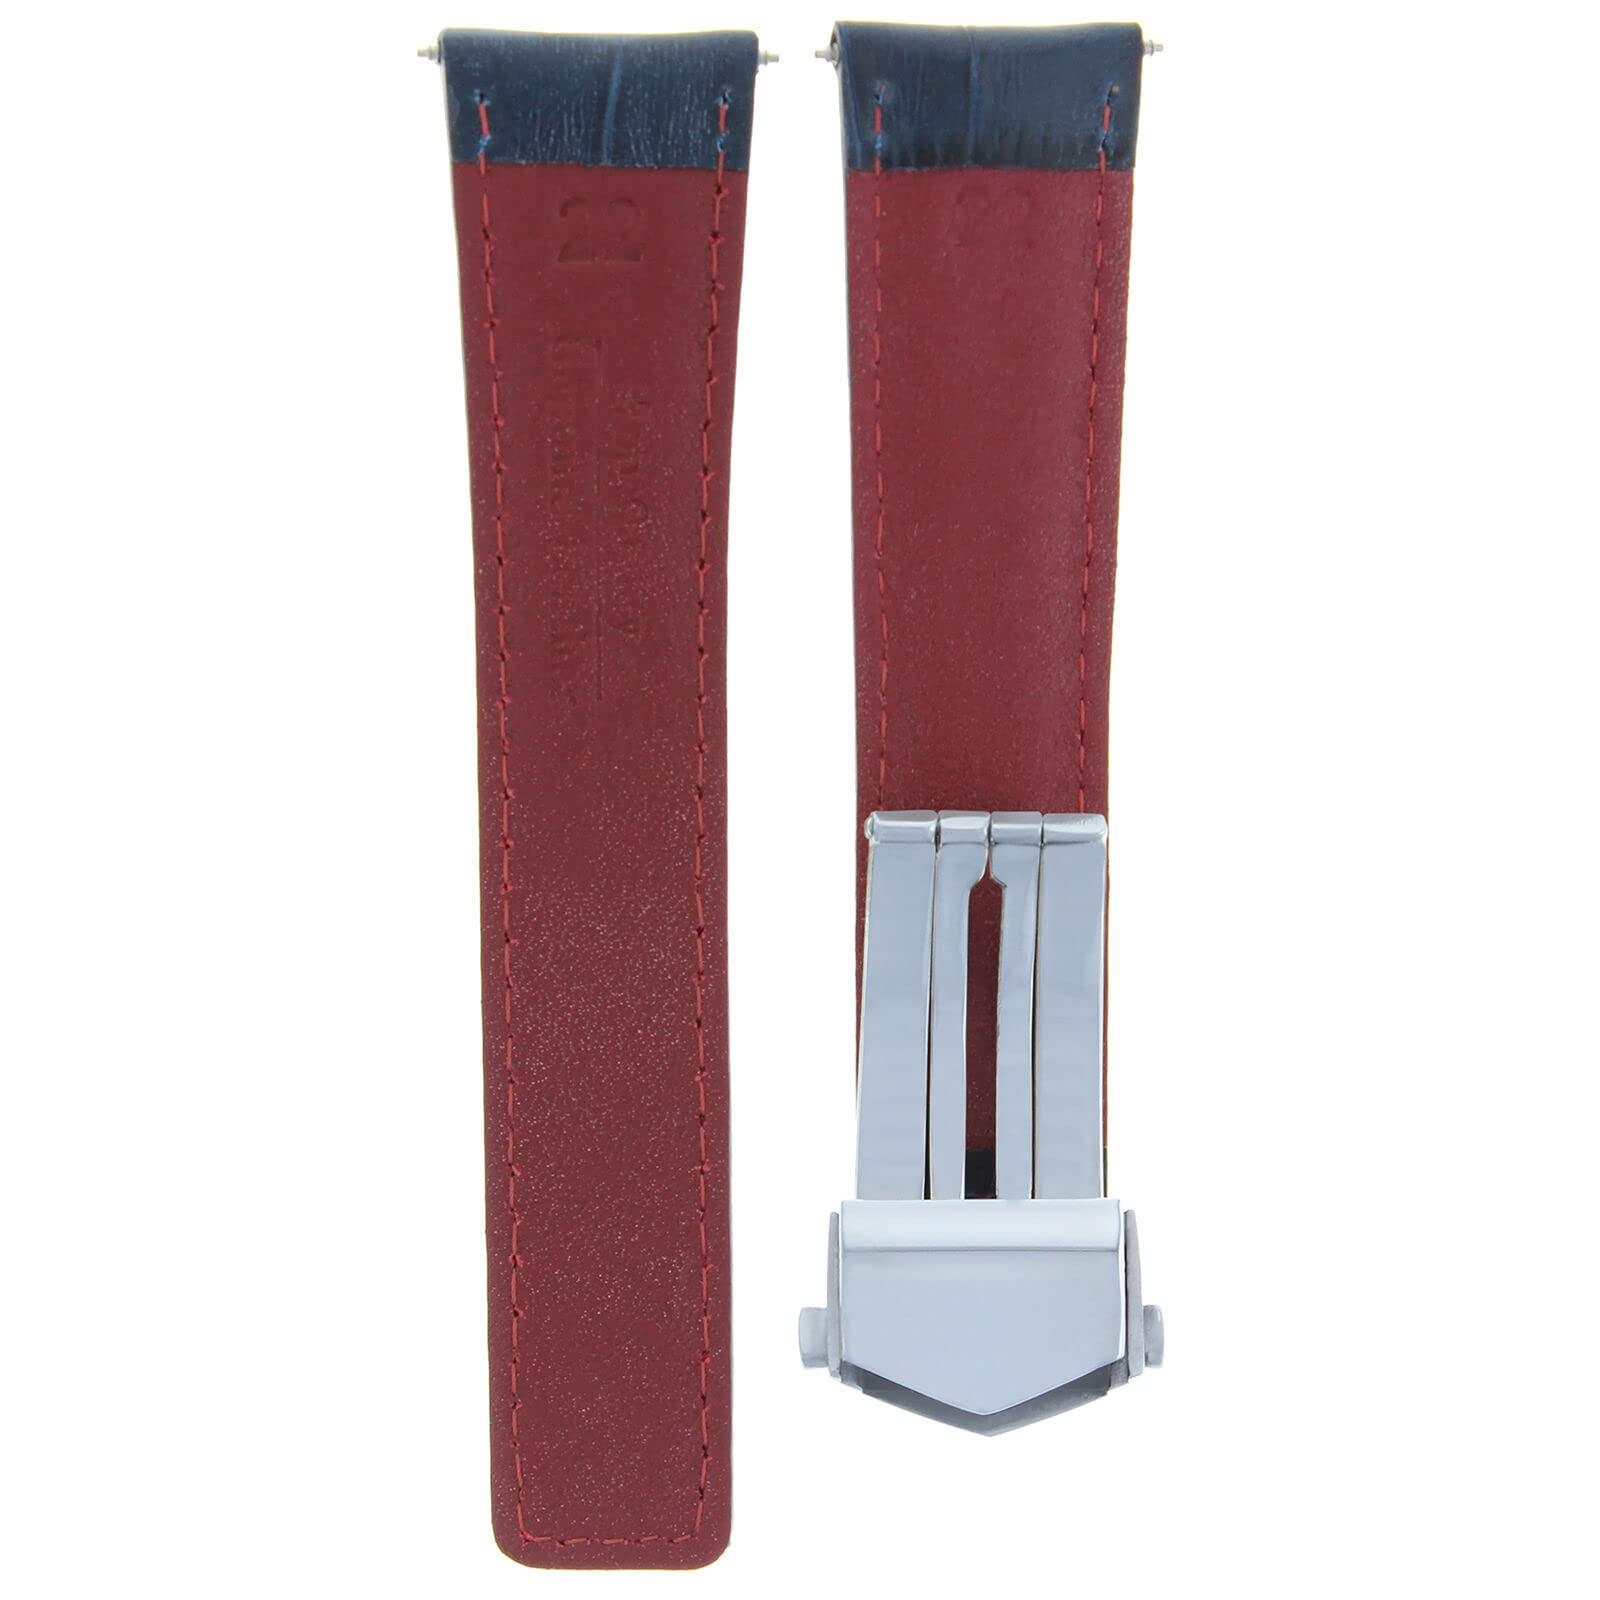 Ewatchparts 22MM MONACO LEATHER WATCH BAND STRAP COMPATIBLE WITH TAG HEUER DEPLOYMENT CLASP BLUE RED